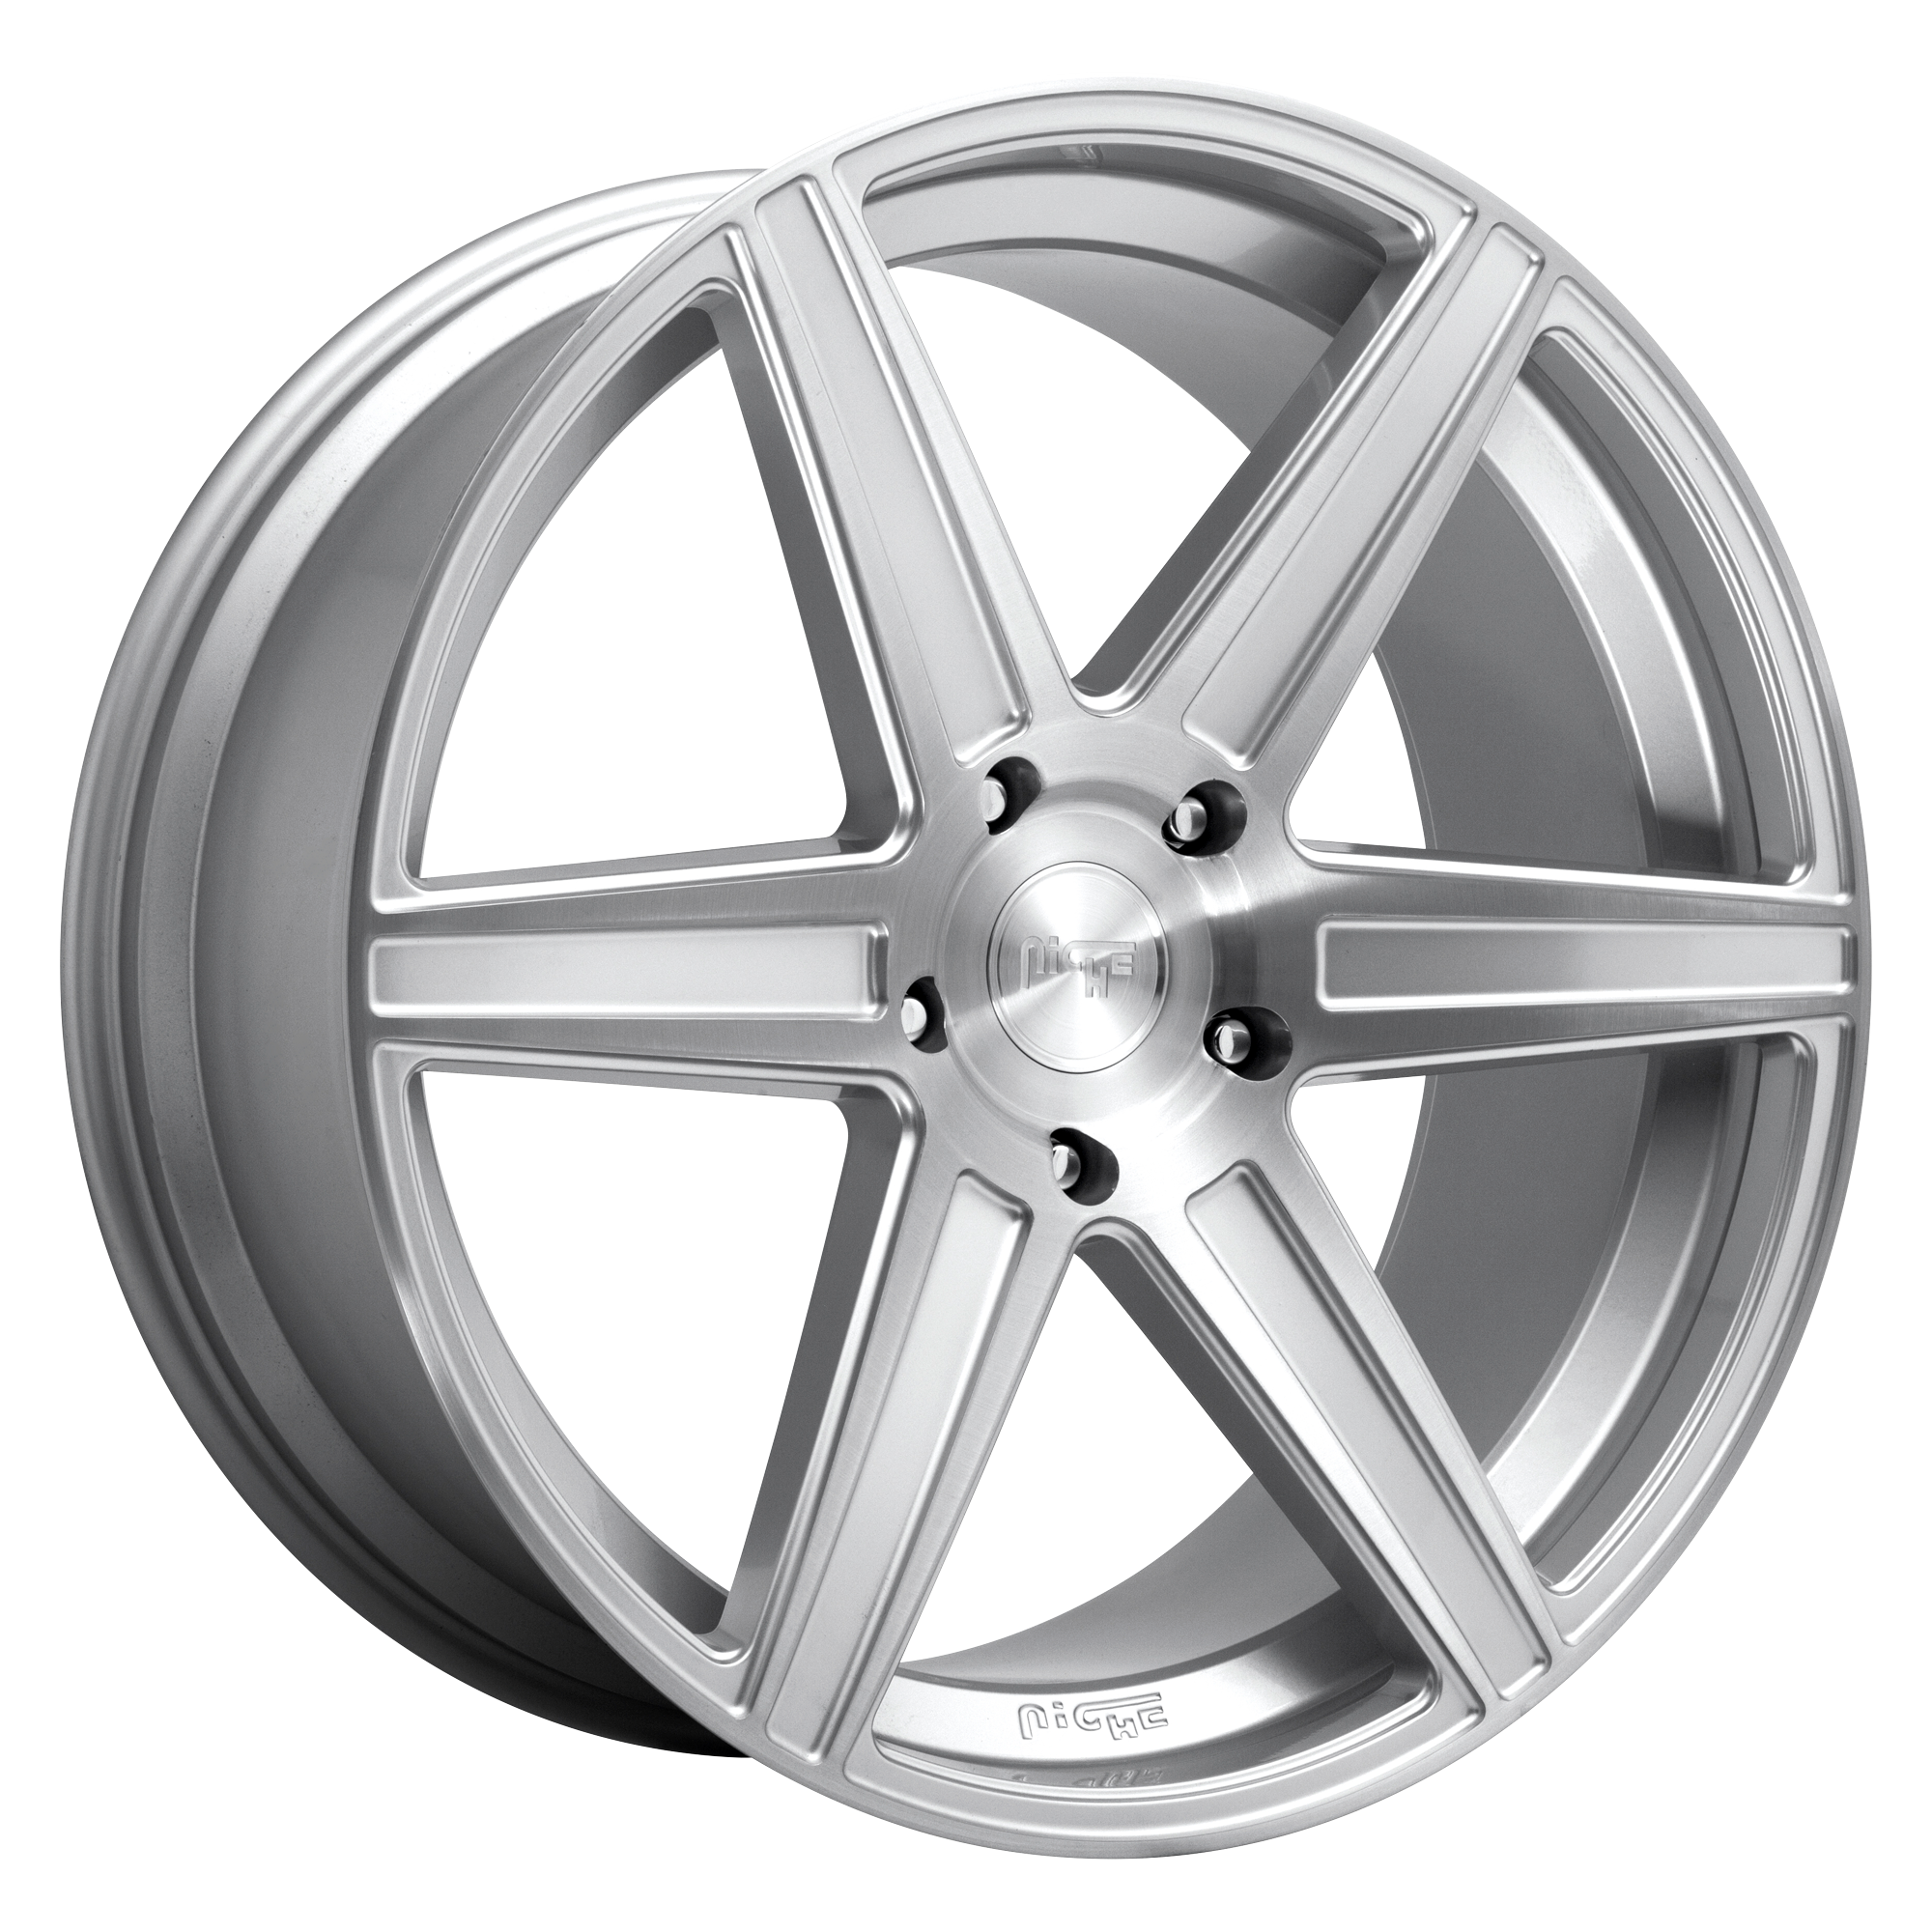 CARINA 22x9.5 6x139.70 GLOSS SILVER BRUSHED (20 mm) - Tires and Engine Performance